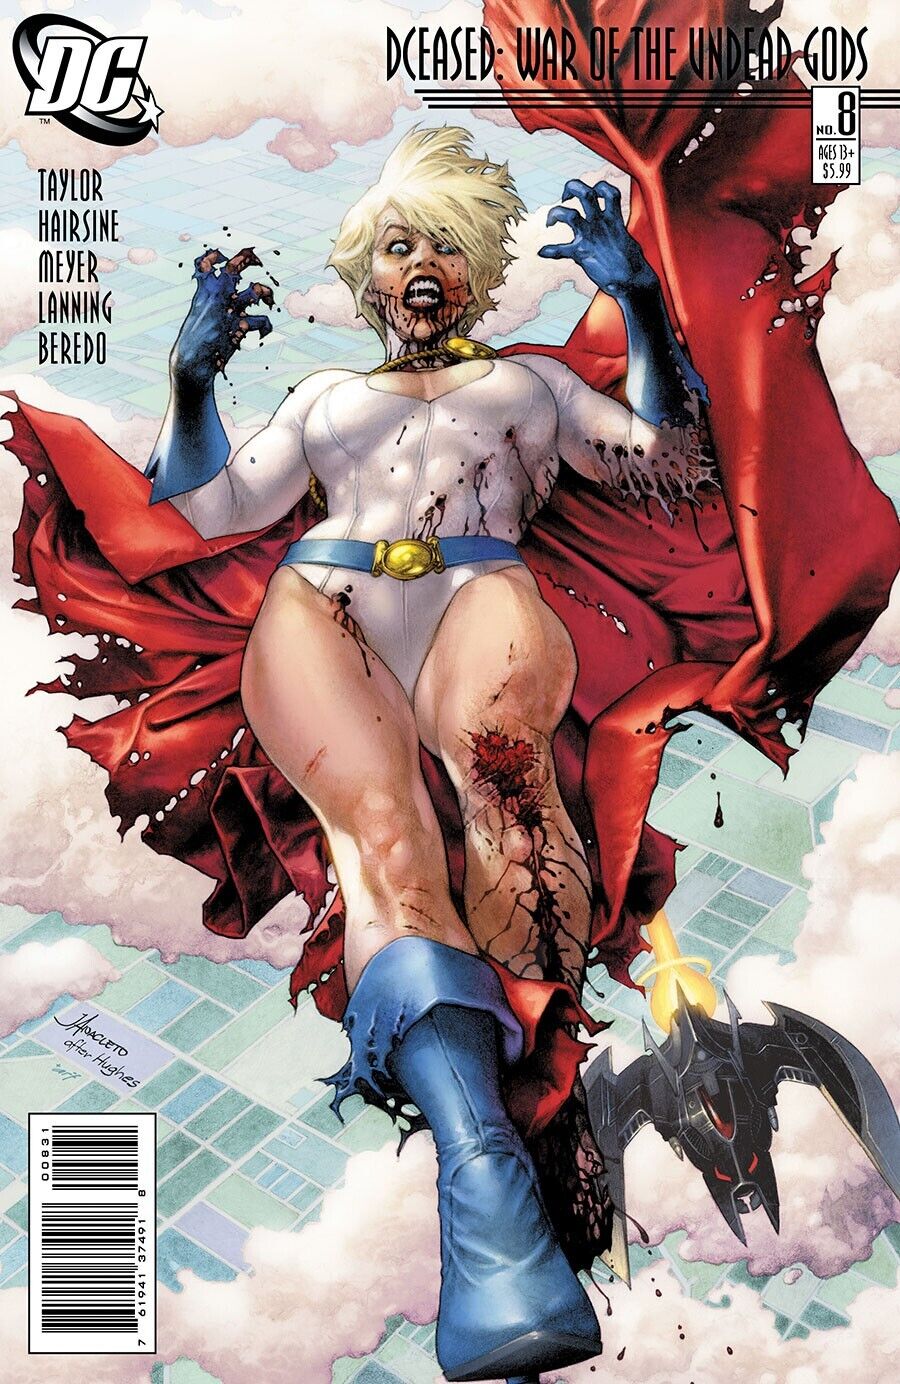 DCEASED WAR OF THE UNDEAD GODS 8 ANACLETO POWERGIRL 1 HOMAGE  VARIANT NM